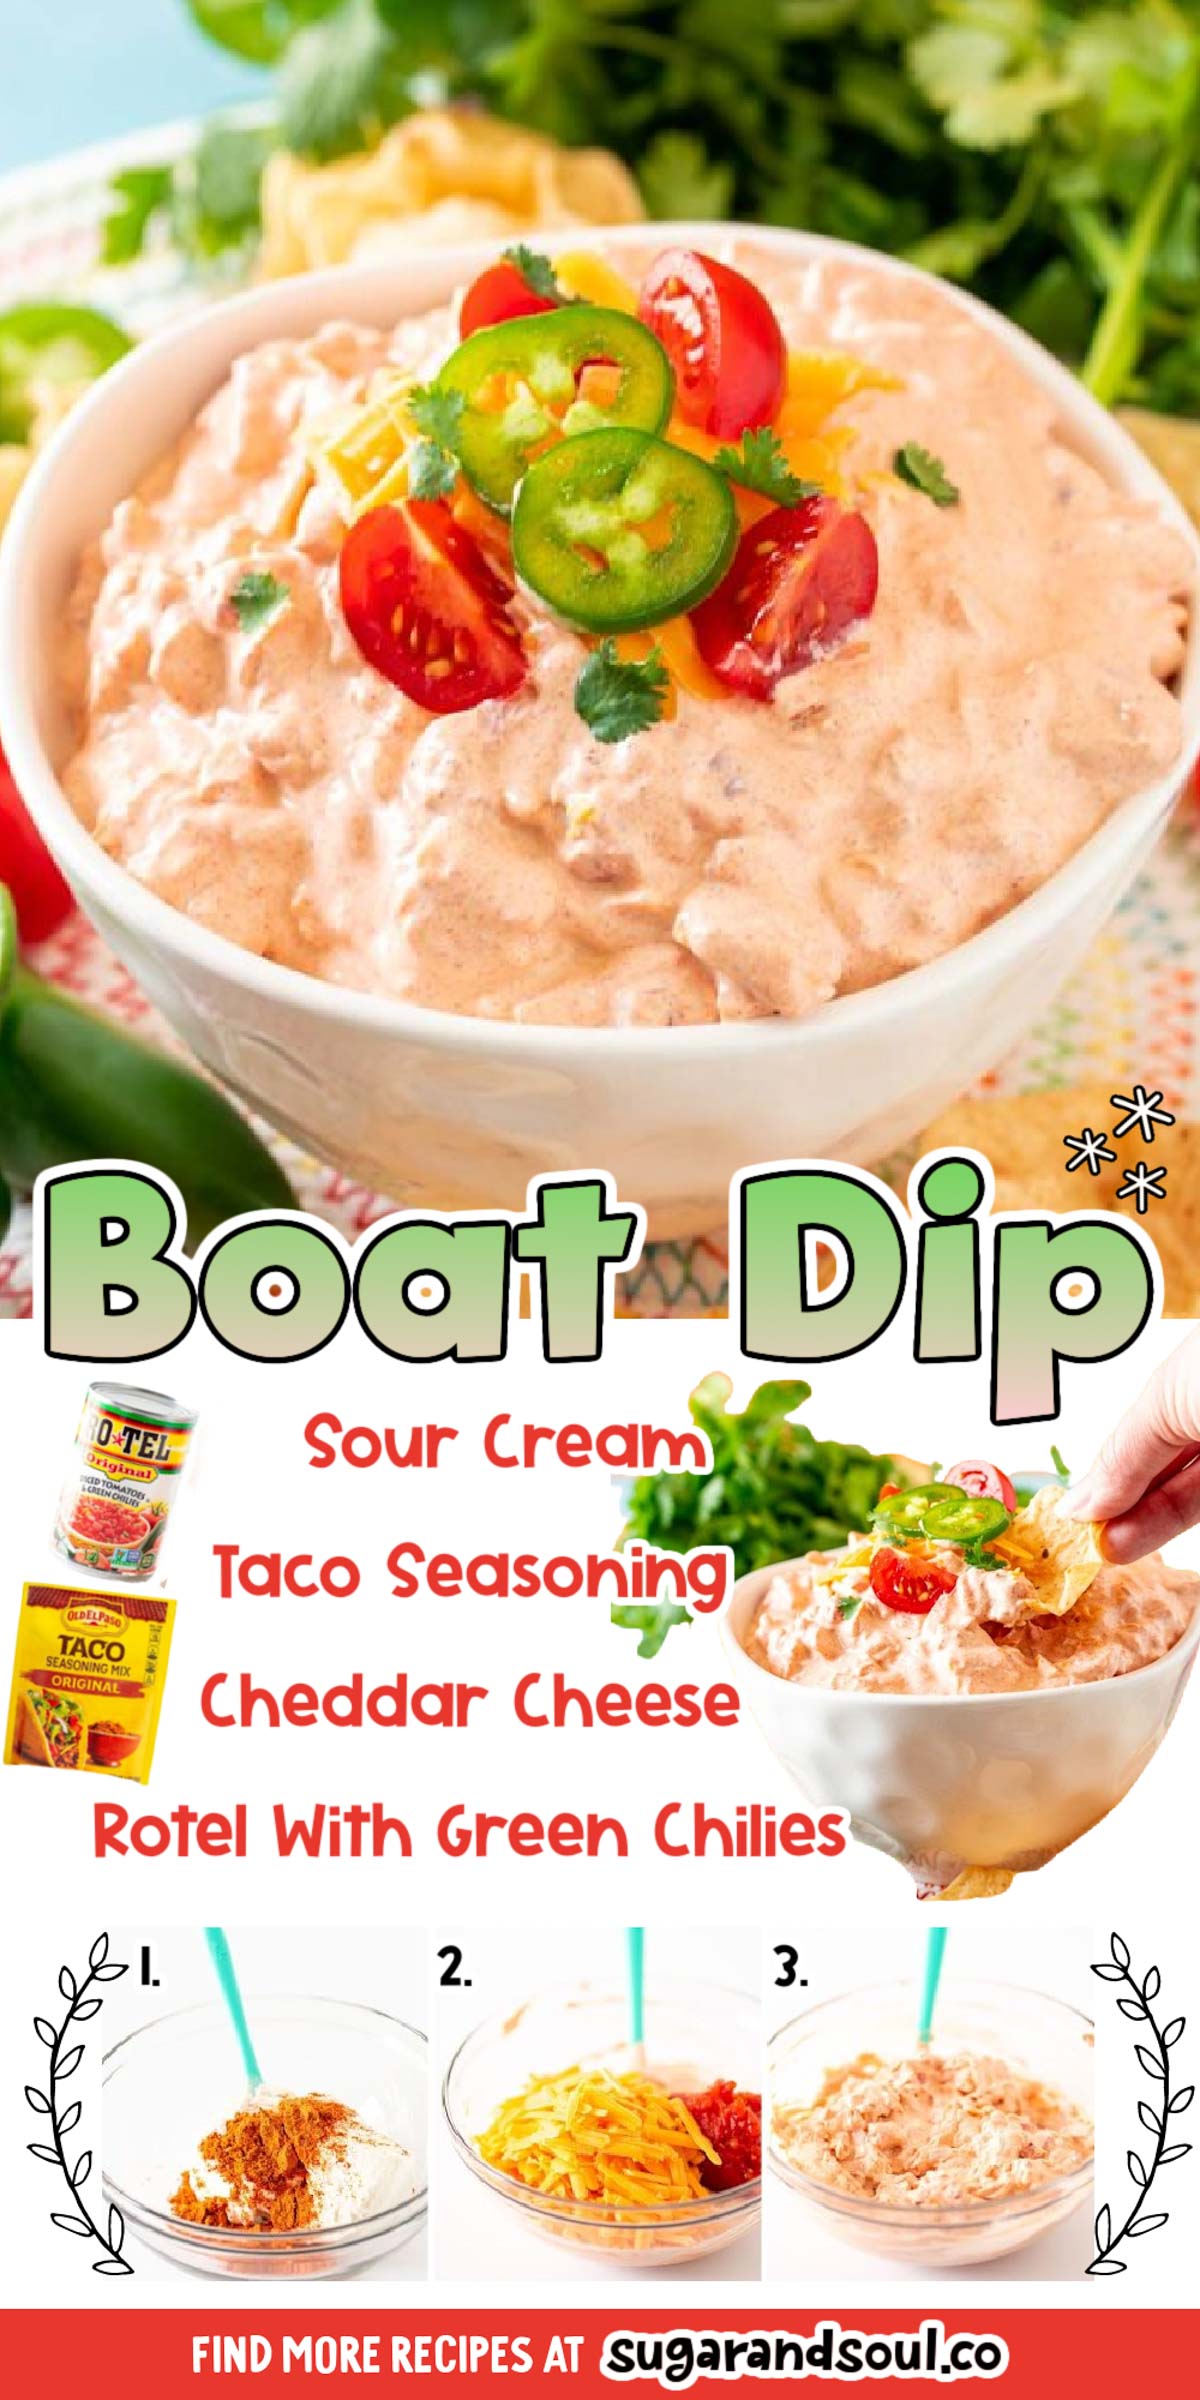 Boat Dip is Tiktok's favorite dip recipe that's filled with mouthwatering Mexican flavor and is made with only 4 ingredients in 5 minutes! This chilled dip makes the best summertime snack! via @sugarandsoulco